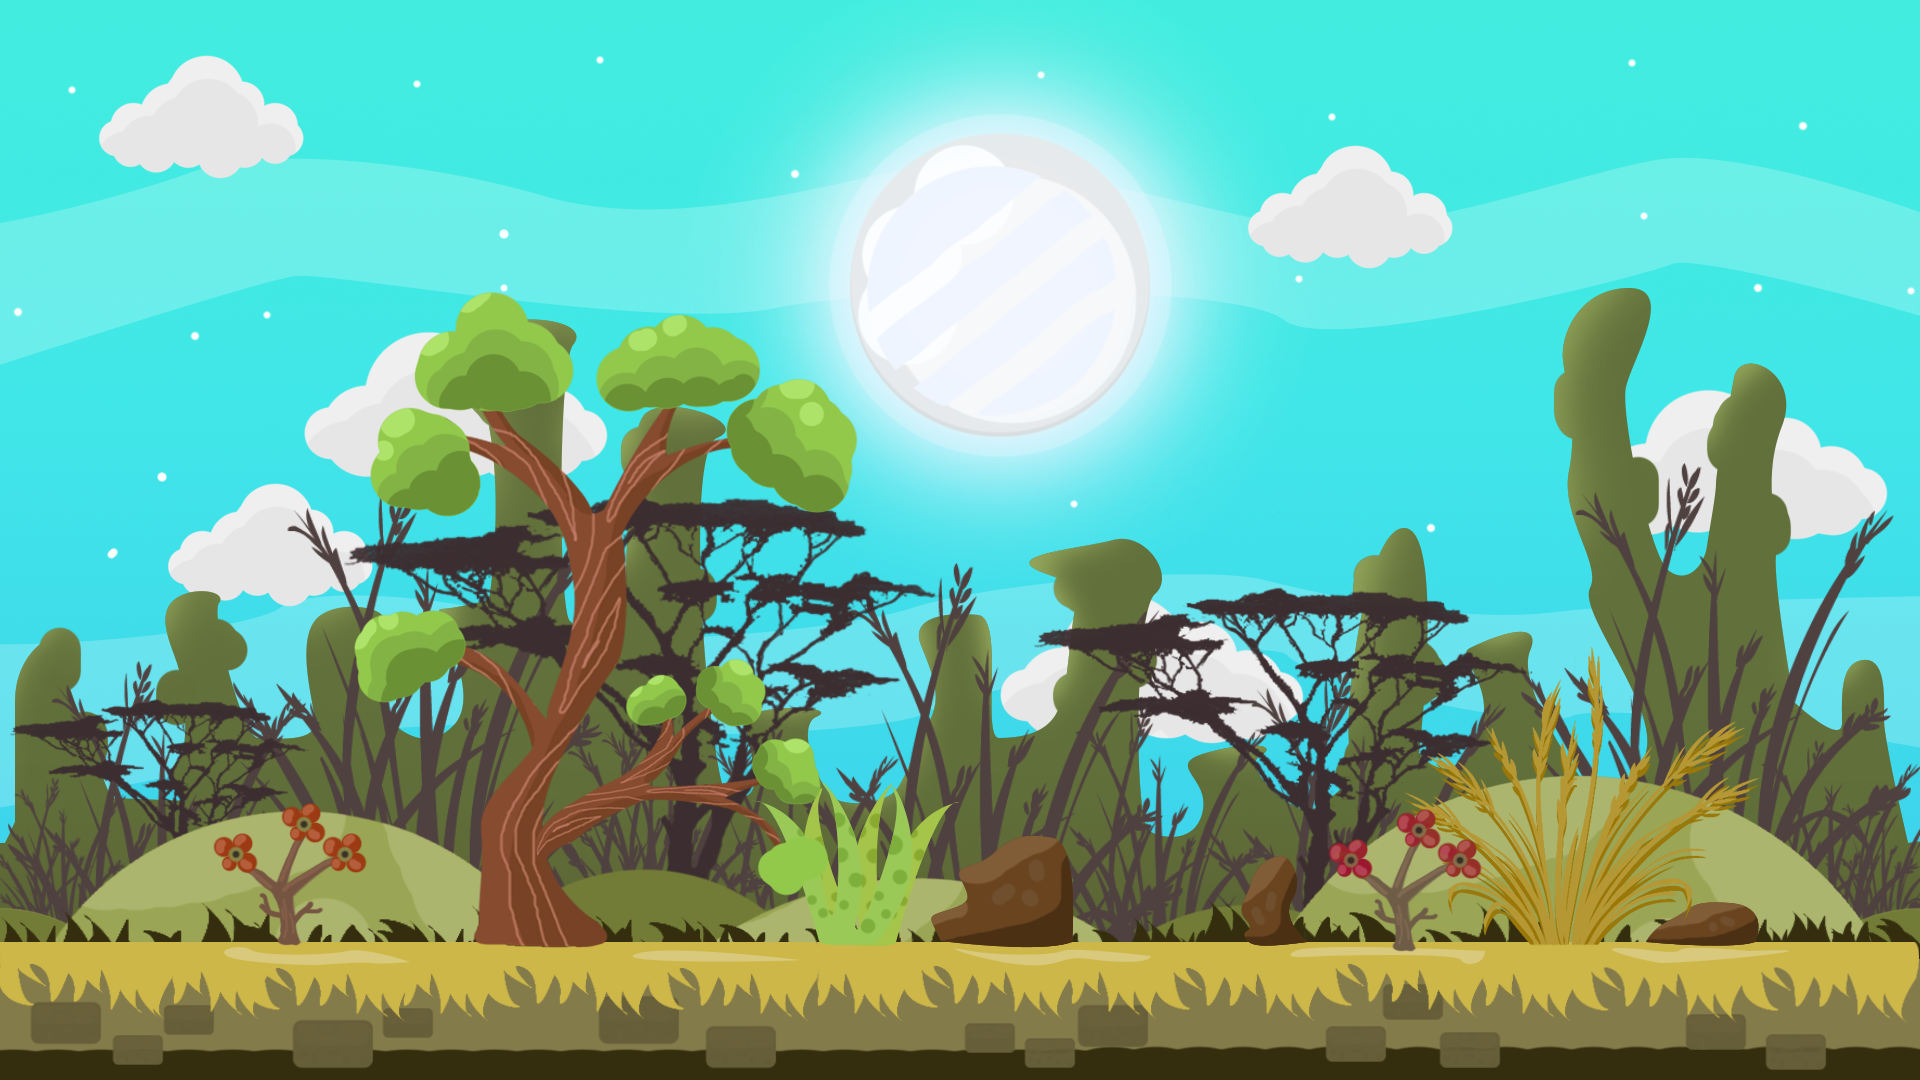 Download FREE 2D GAME FOREST VECTOR BACKGROUND 2 by MarwaMJ